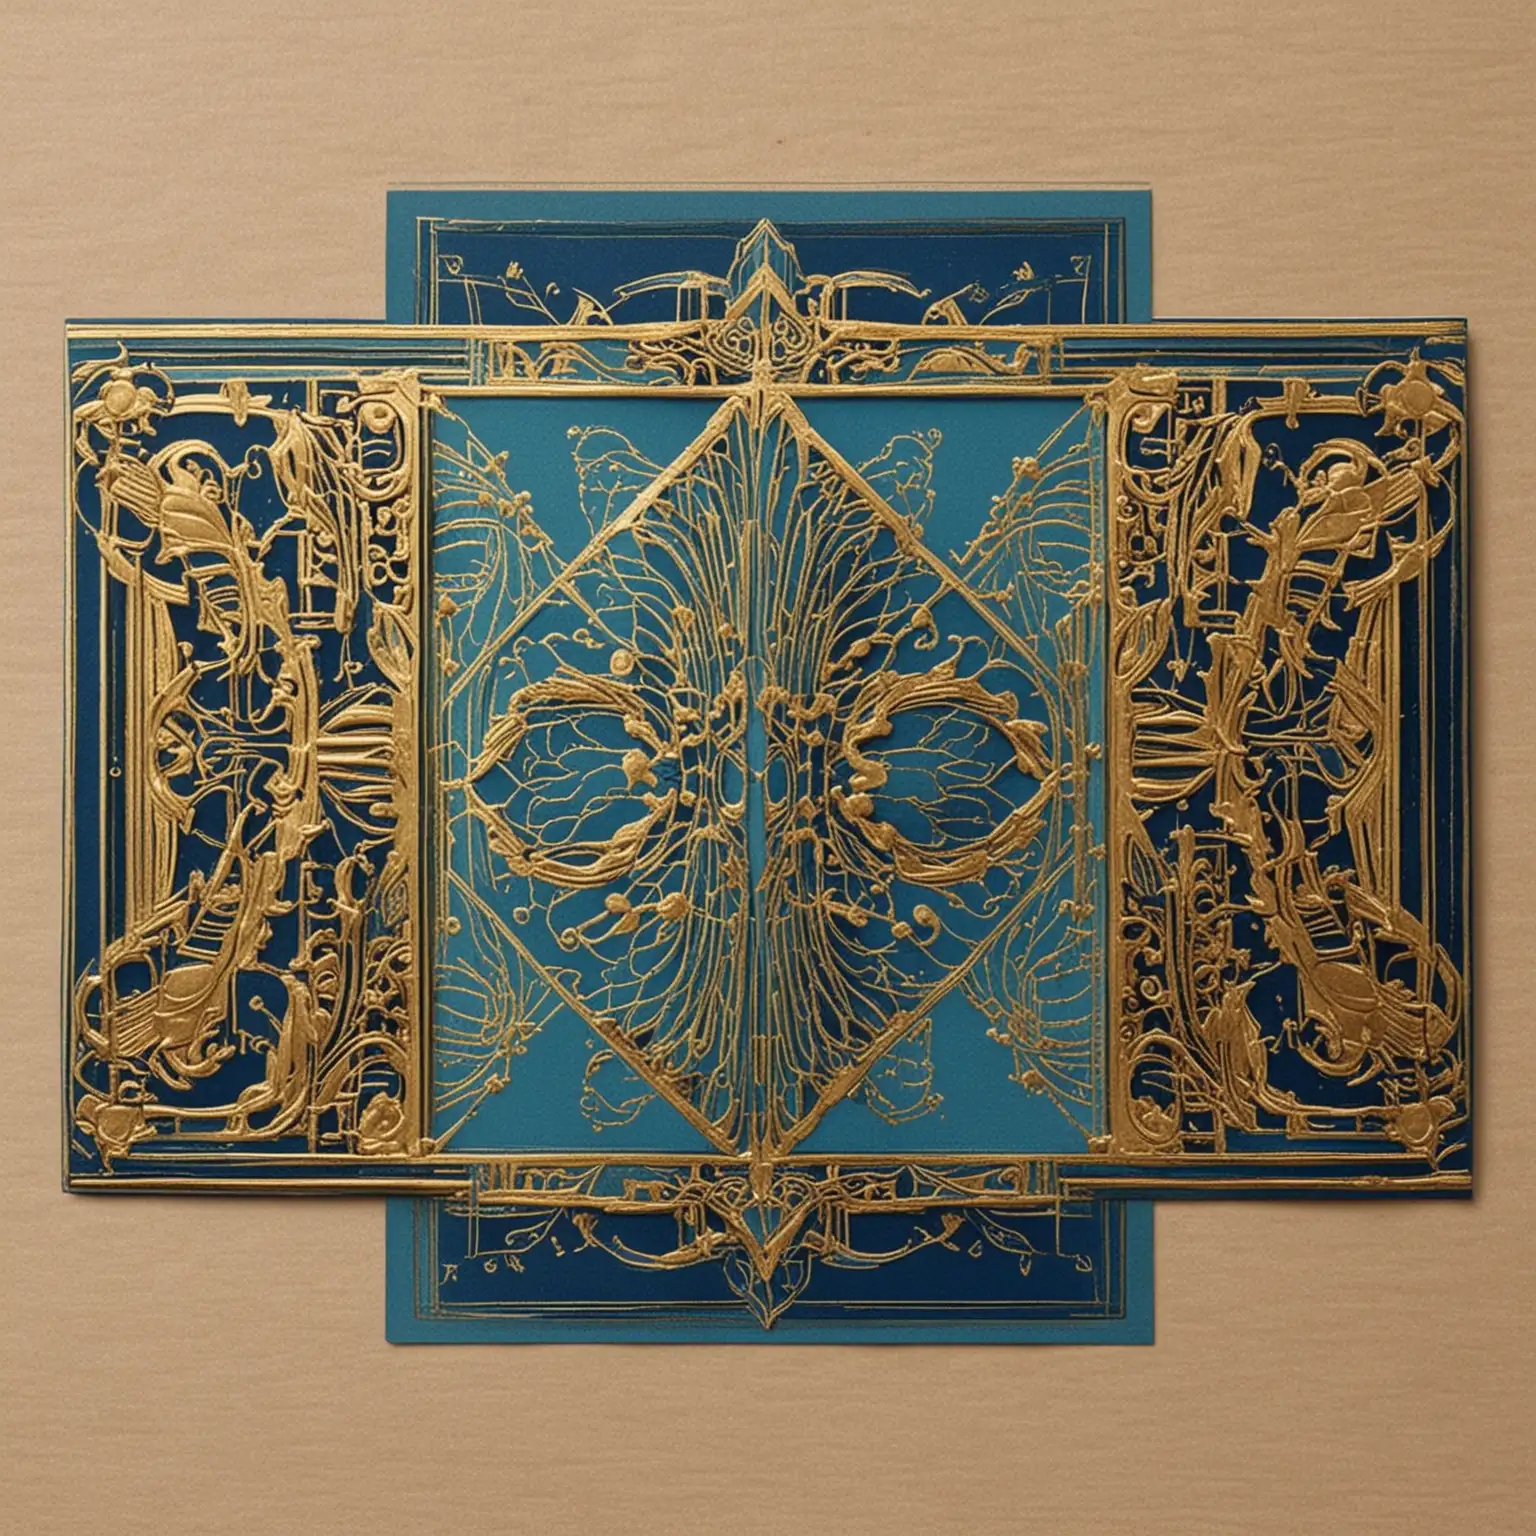 Art-Deco-Style-Playing-Card-Design-with-Blue-and-Gold-Borders